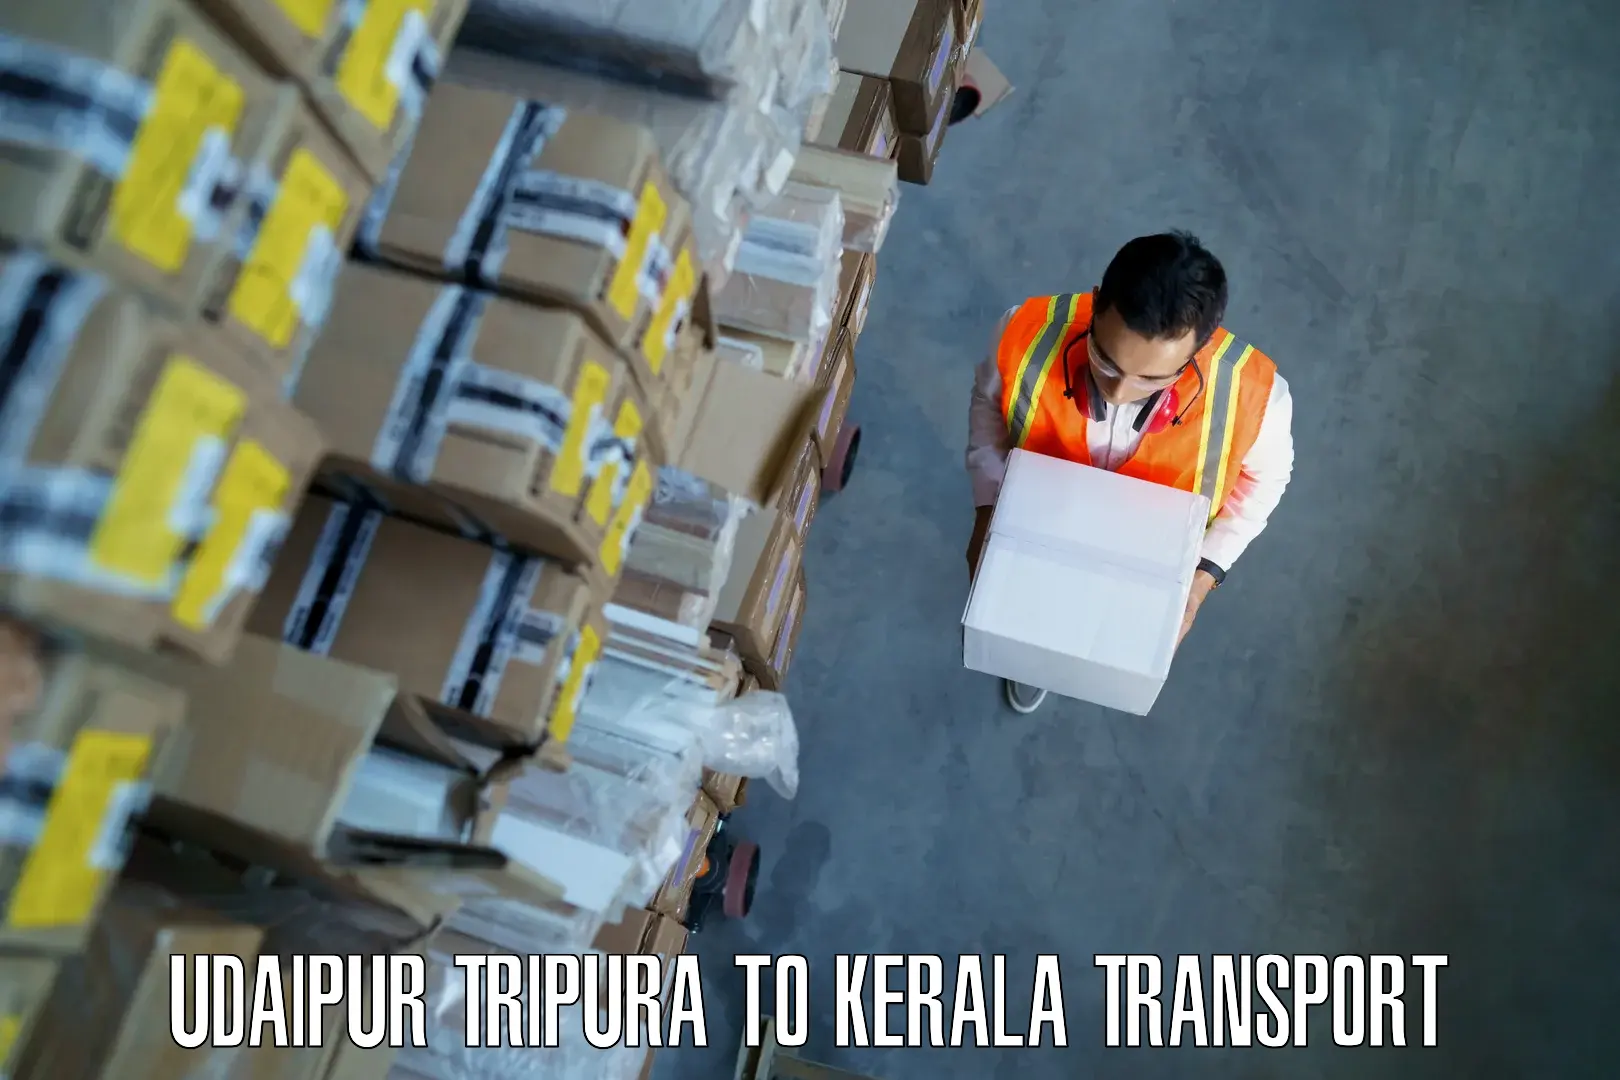 Delivery service Udaipur Tripura to Kerala